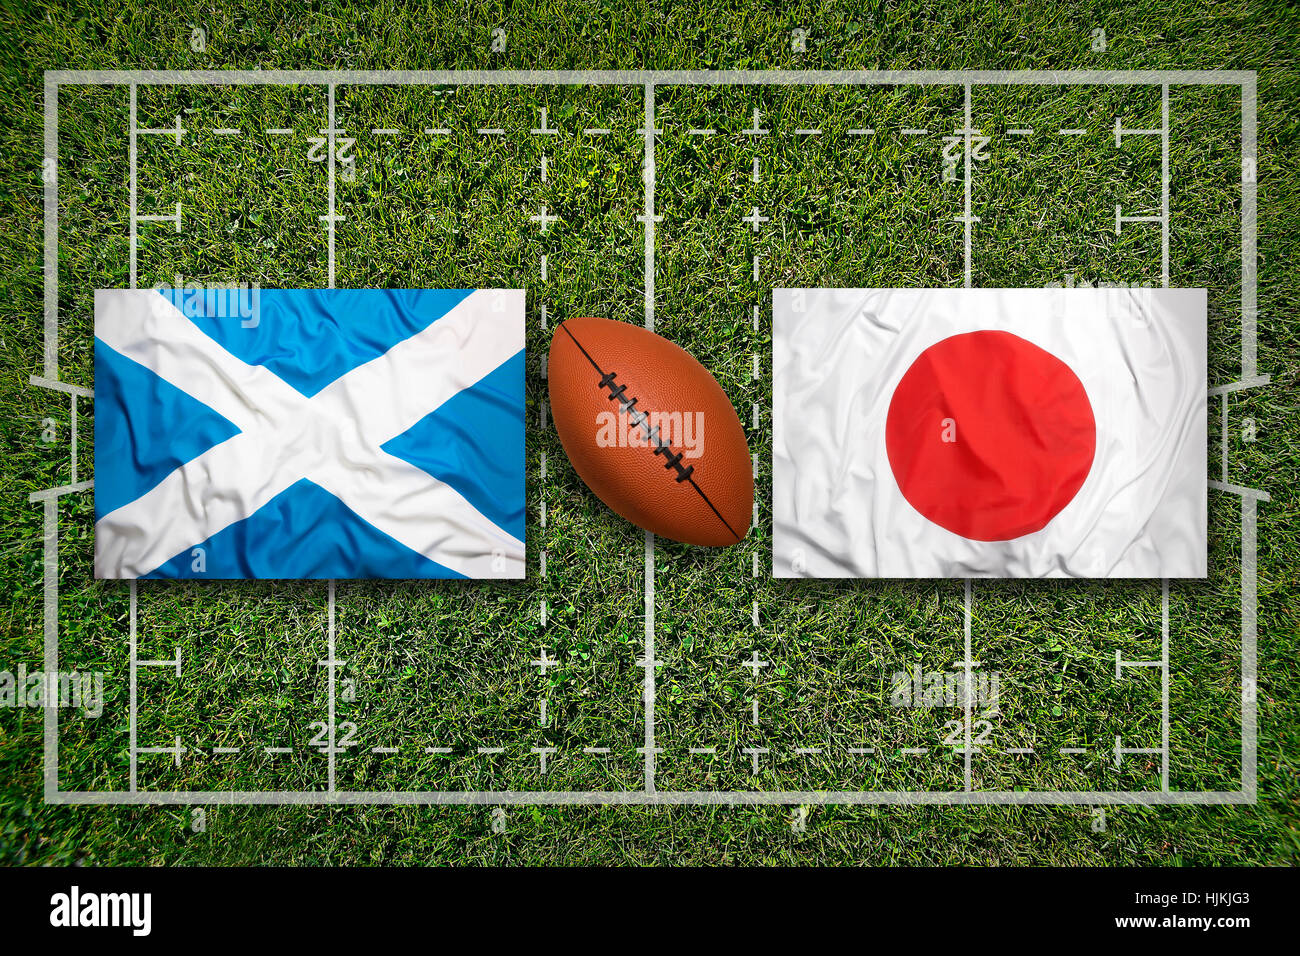 Scotland vs. Japan flags on green rugby field Stock Photo